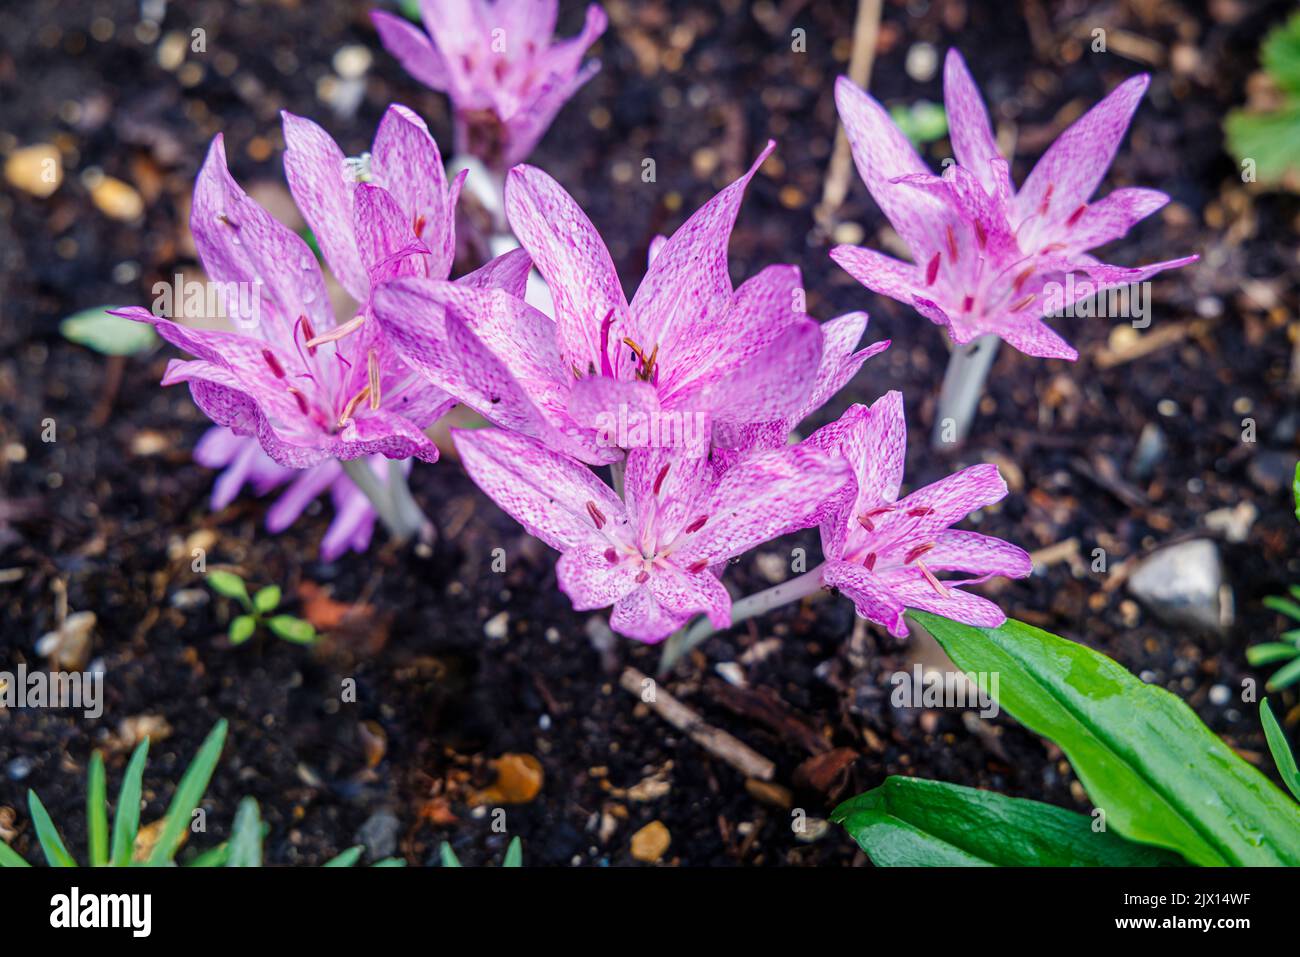 Delicate purple mottled Colchicum agrippinum (autumn crocus) in flower in late summer to early autumn in a garden in Surrey, south-east England Stock Photo